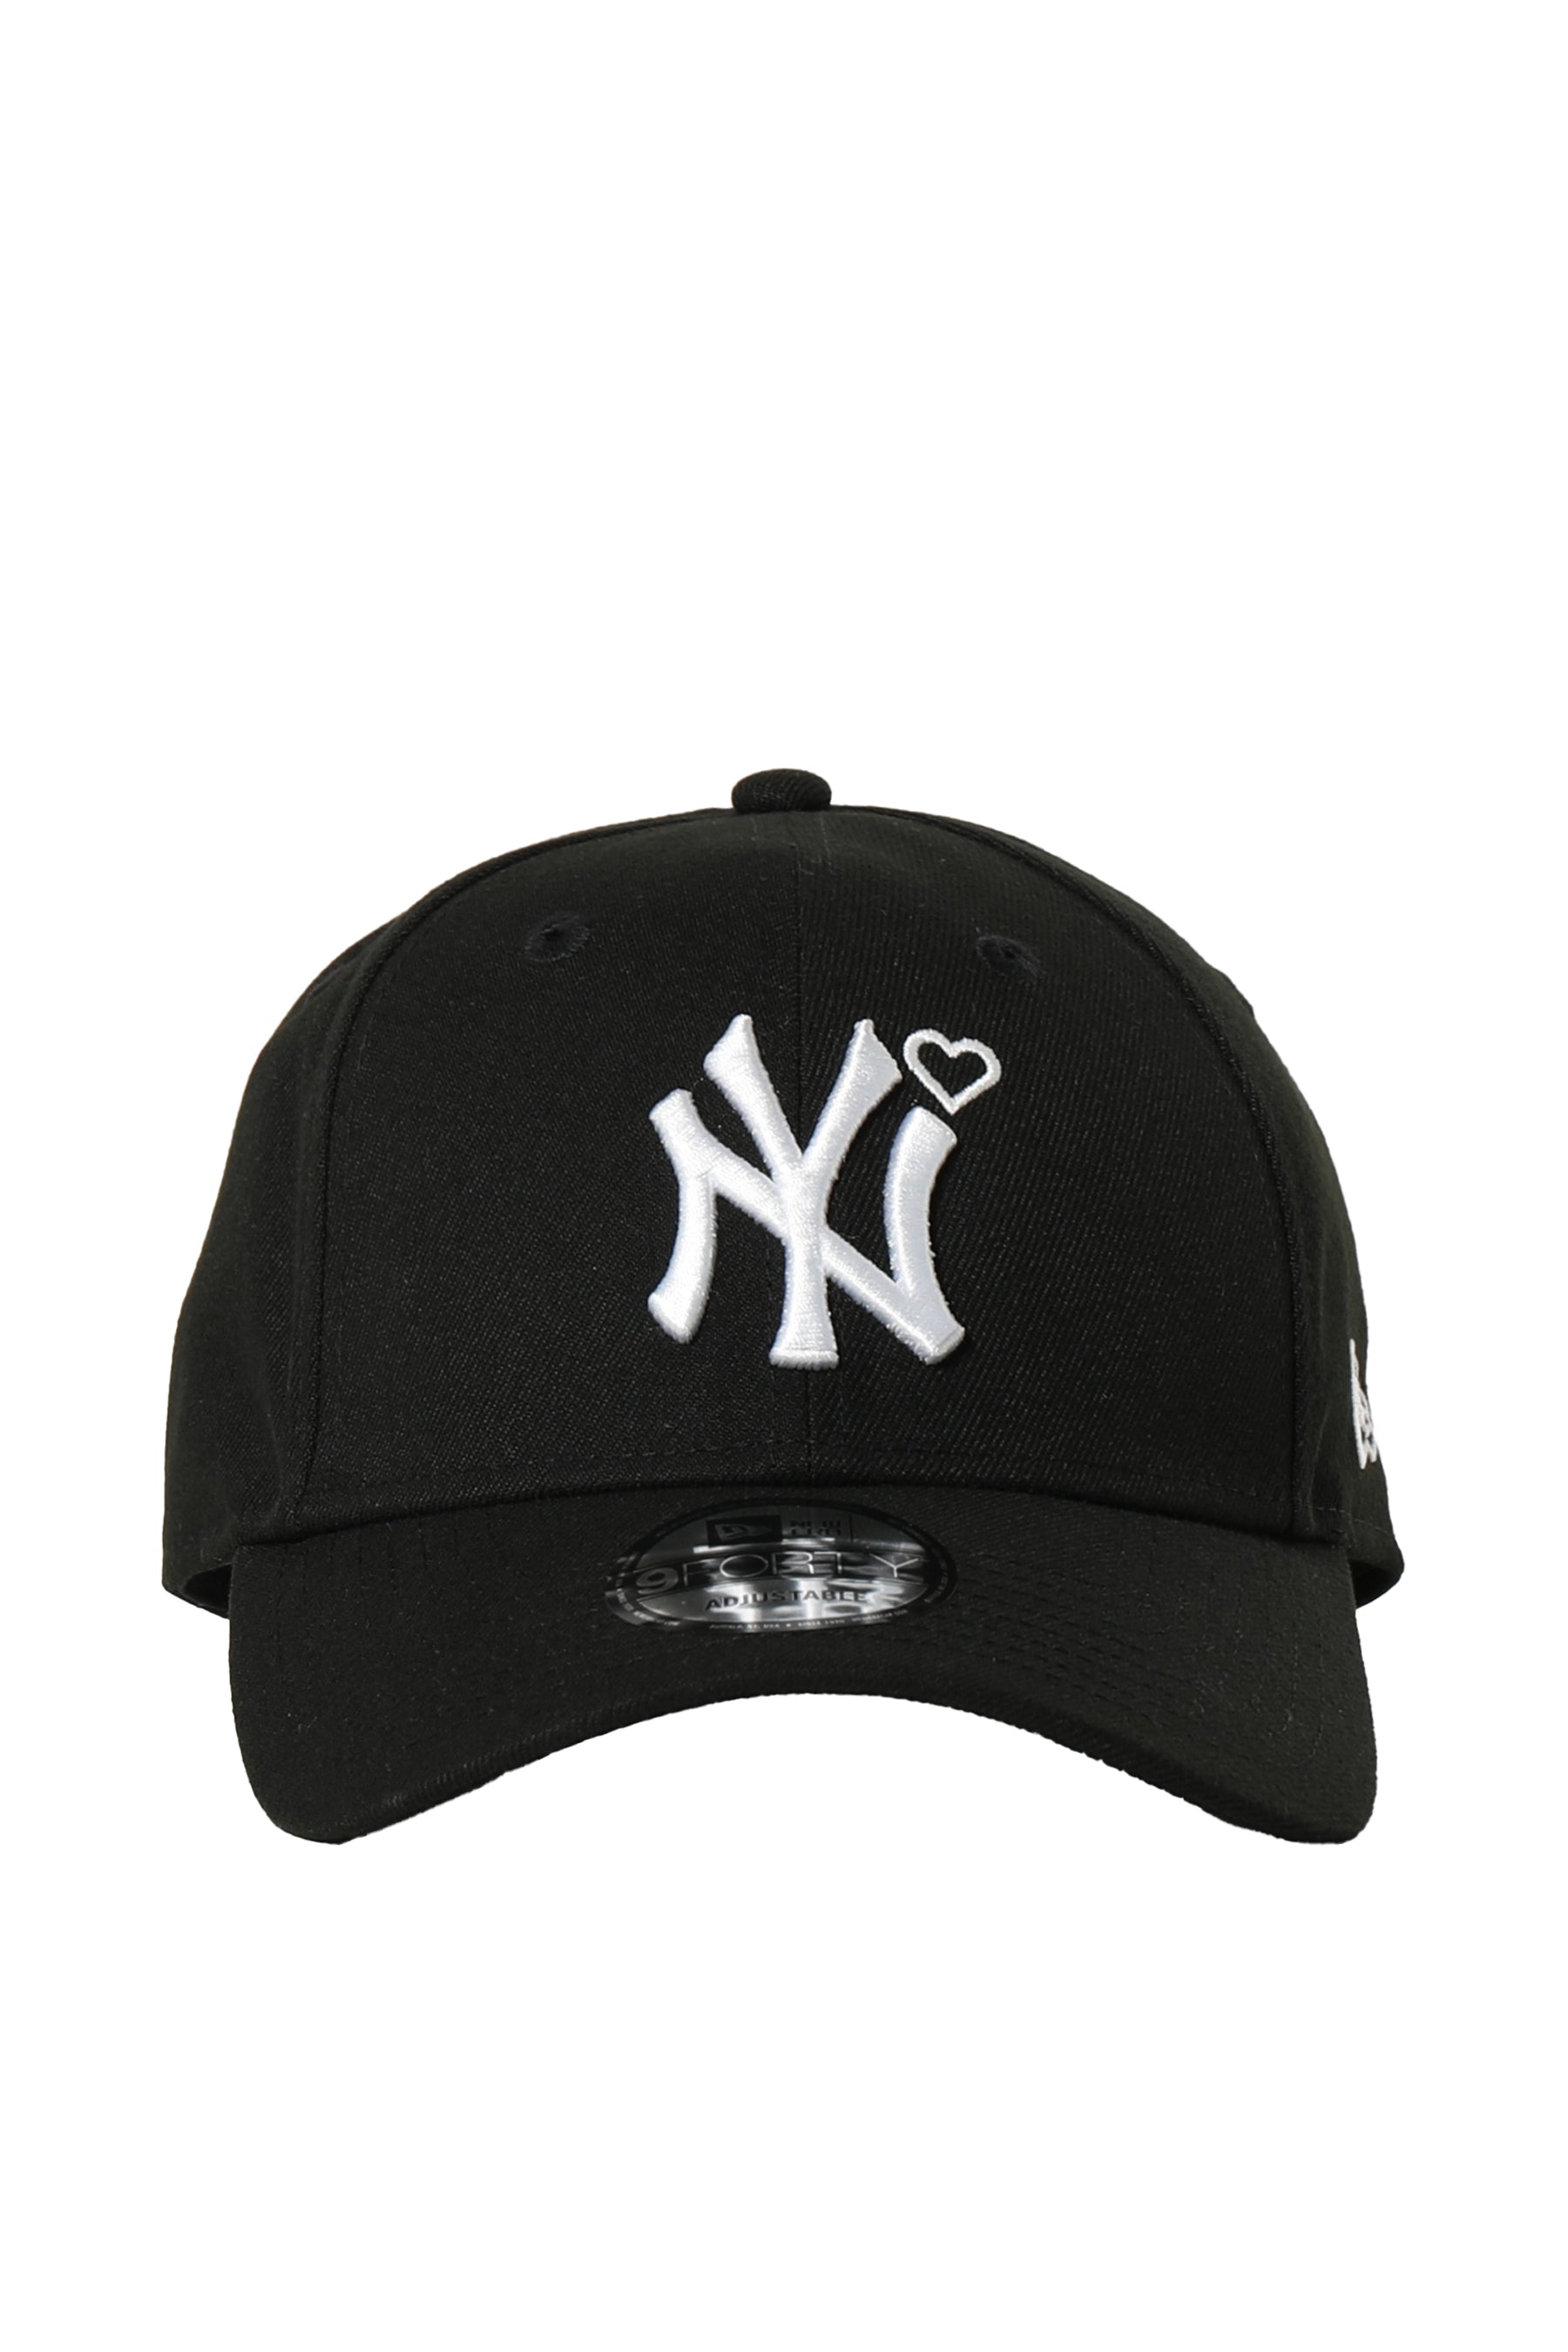 BASICKS SS24 9 FORTY YANKEES HEART EMBROIDERY CAP / BLK/WHT -NUBIAN